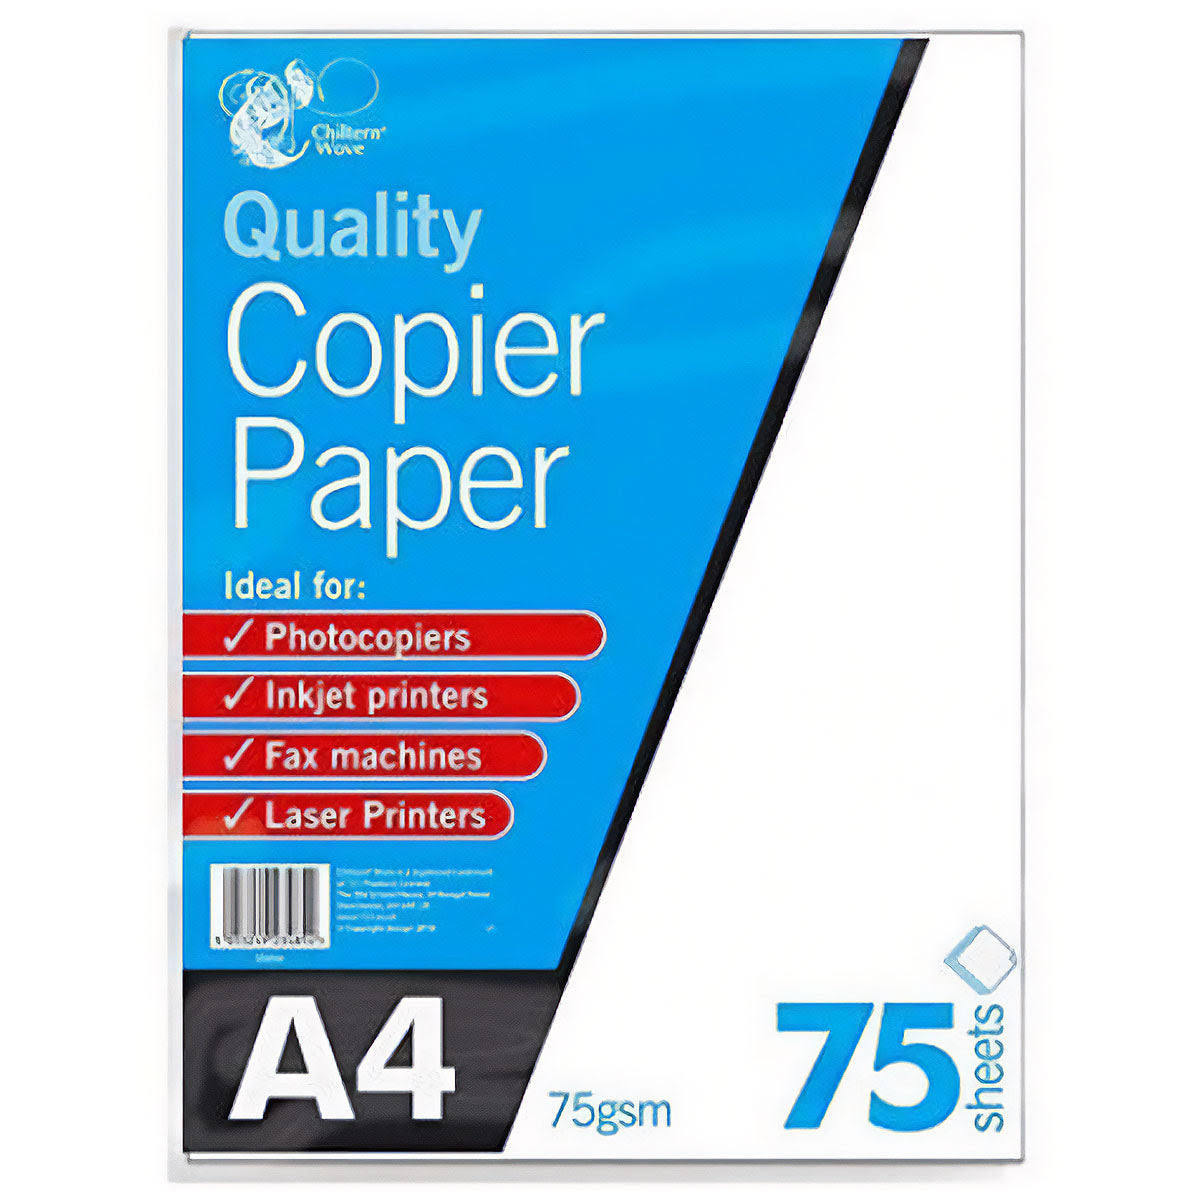 2 x A4 Copier Paper 75 Sheets 75gsm Photocopy, Laser & Inkjet Printer for Everyday